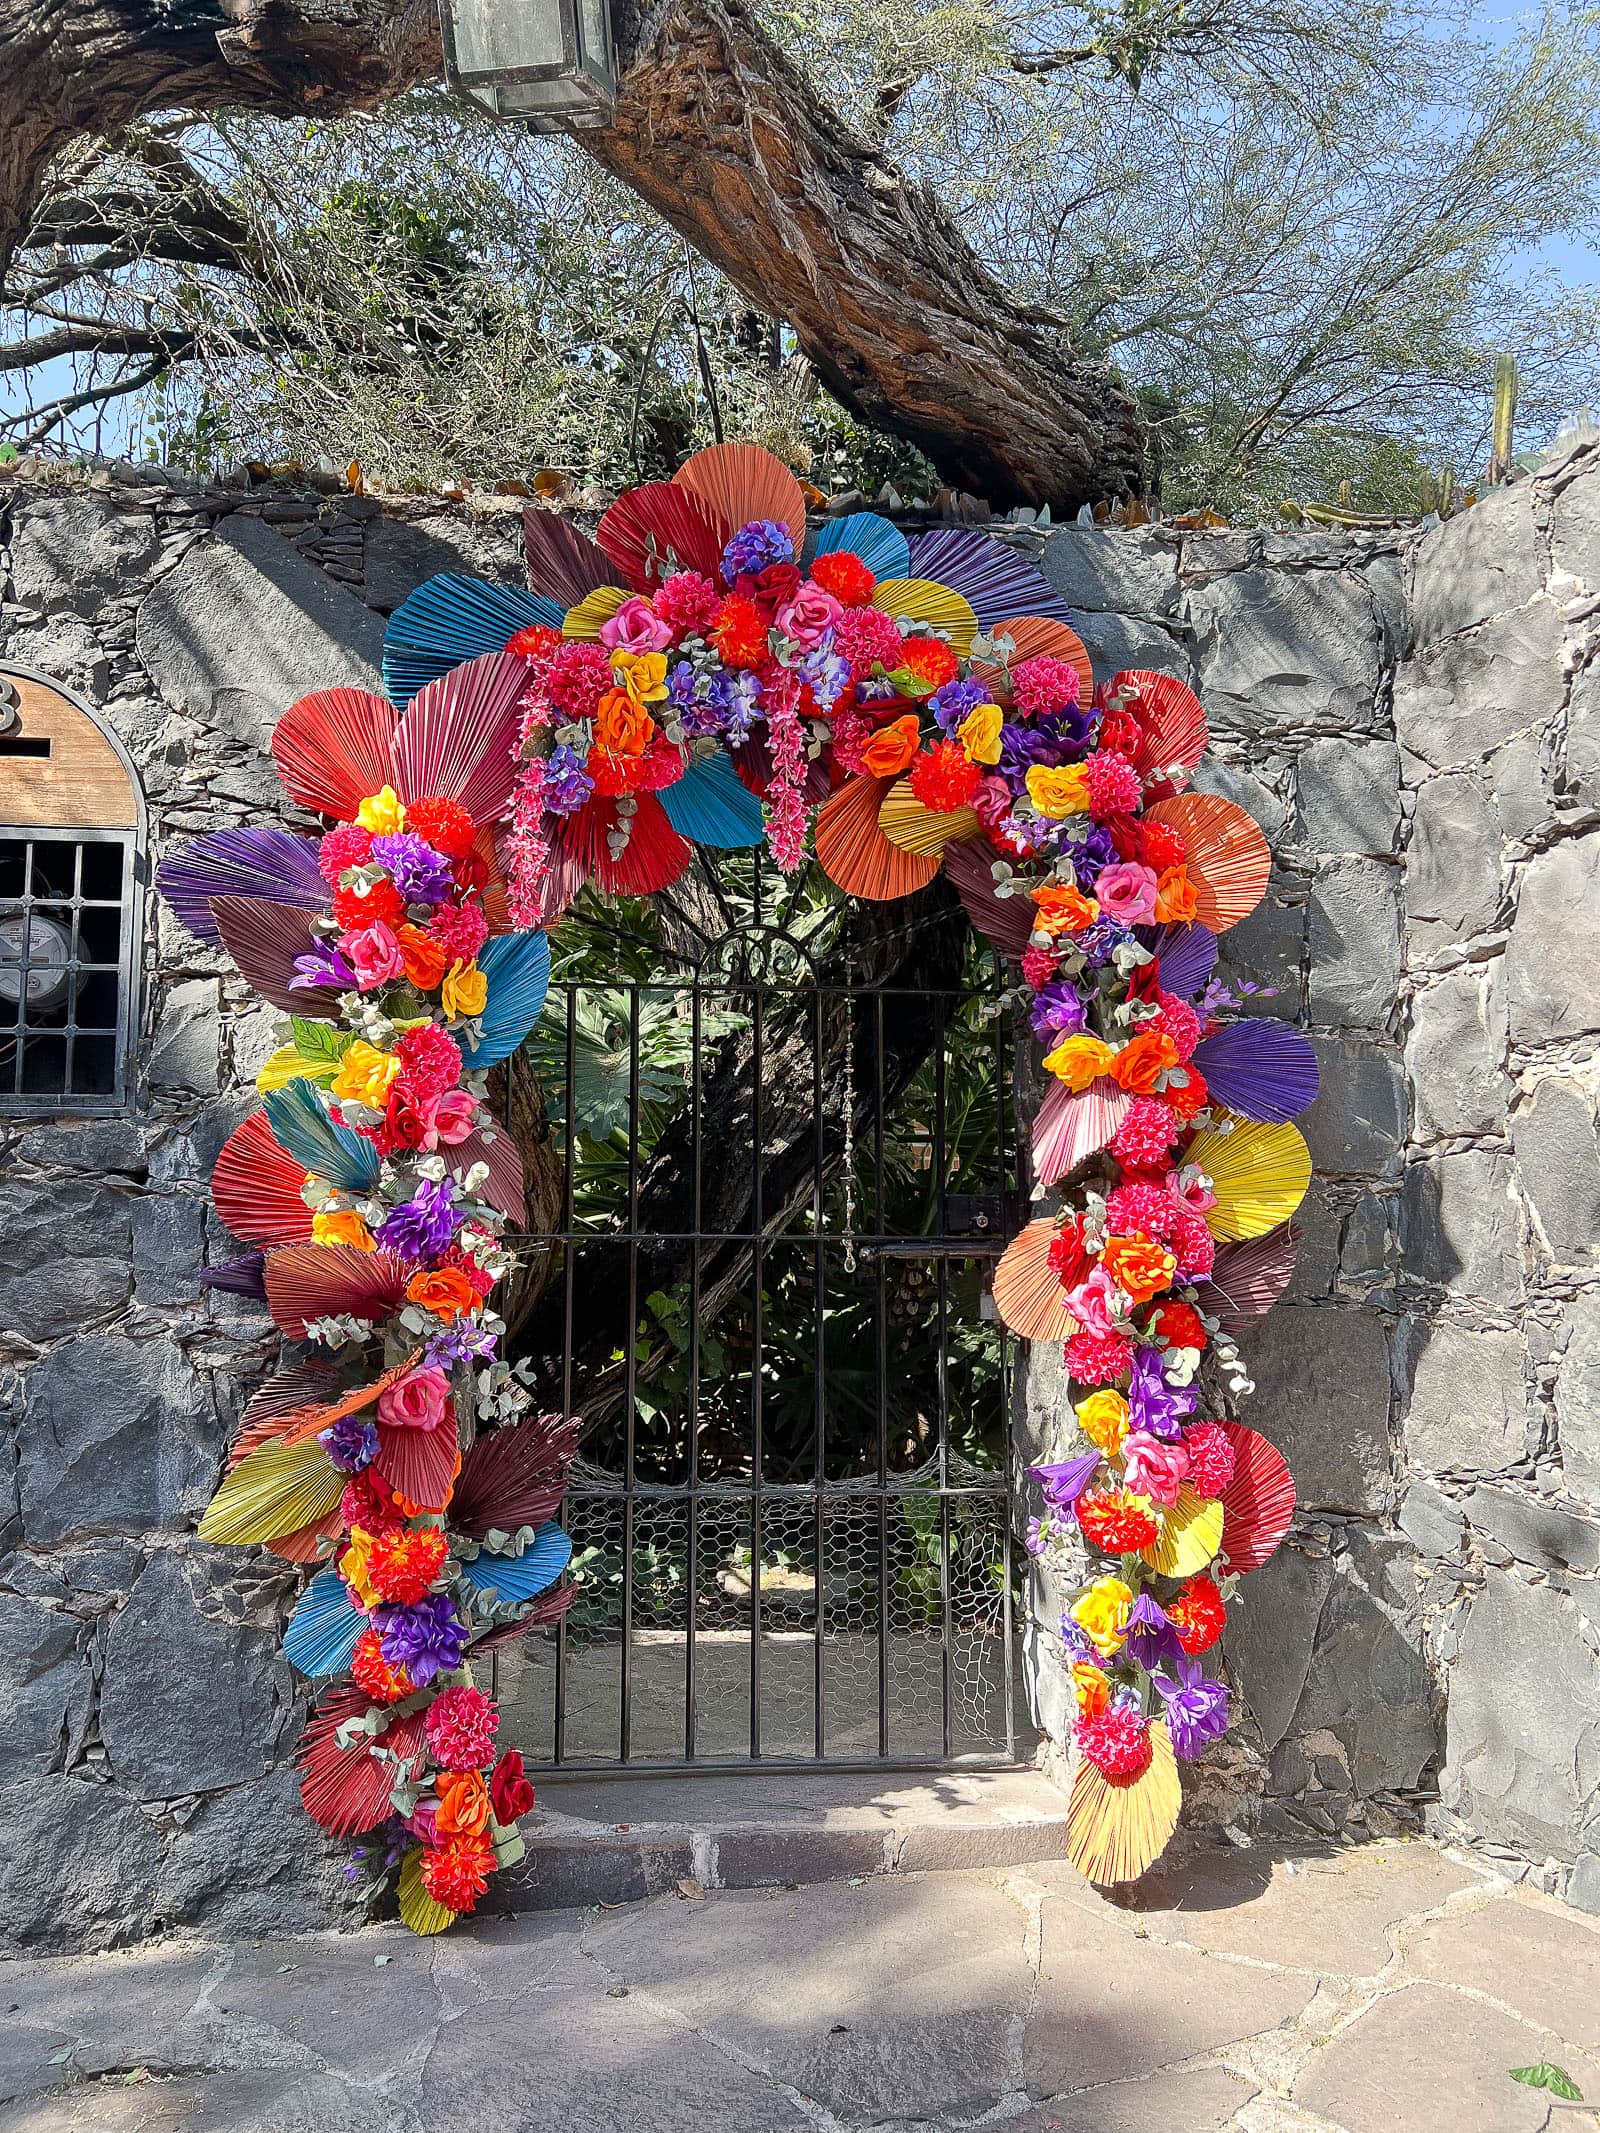 Gorgeous flowers over arched doorways on my trip to San Miguel de Allende